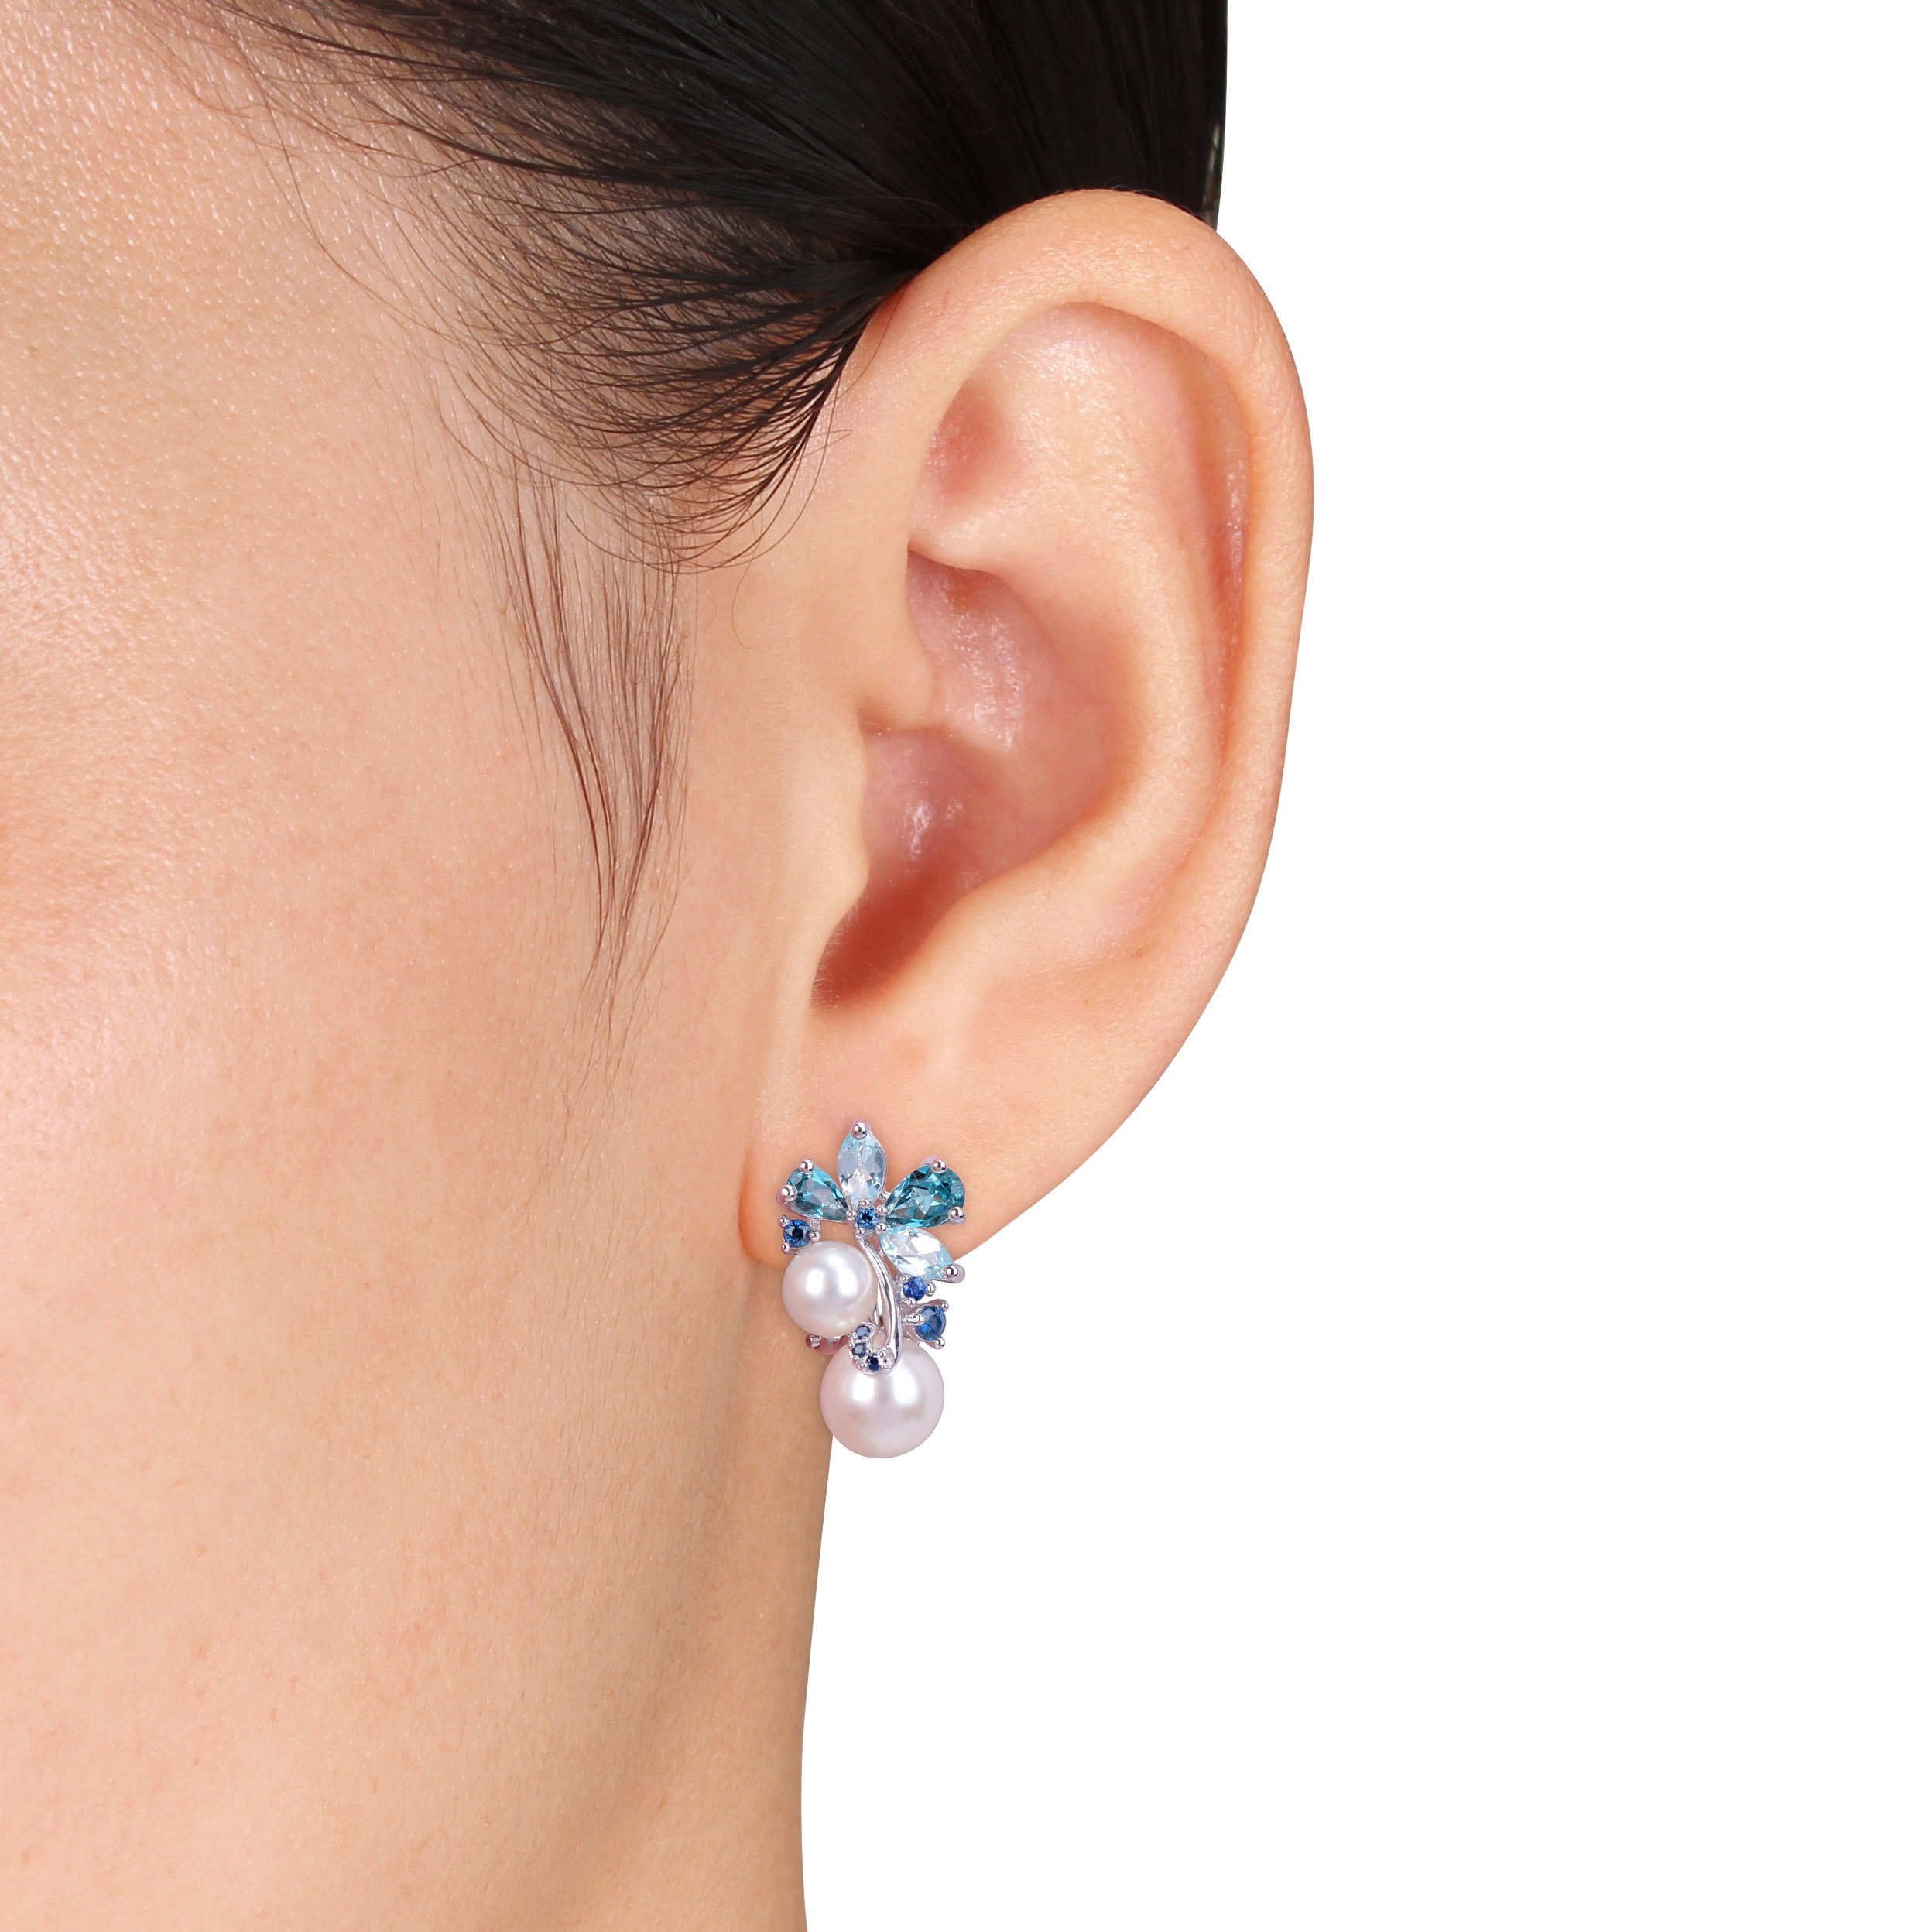 3 CT TGW London and Sky Blue Topaz, Sapphire and White Cultured Freshwater Pearl Cluster Earrings in Sterling Silver